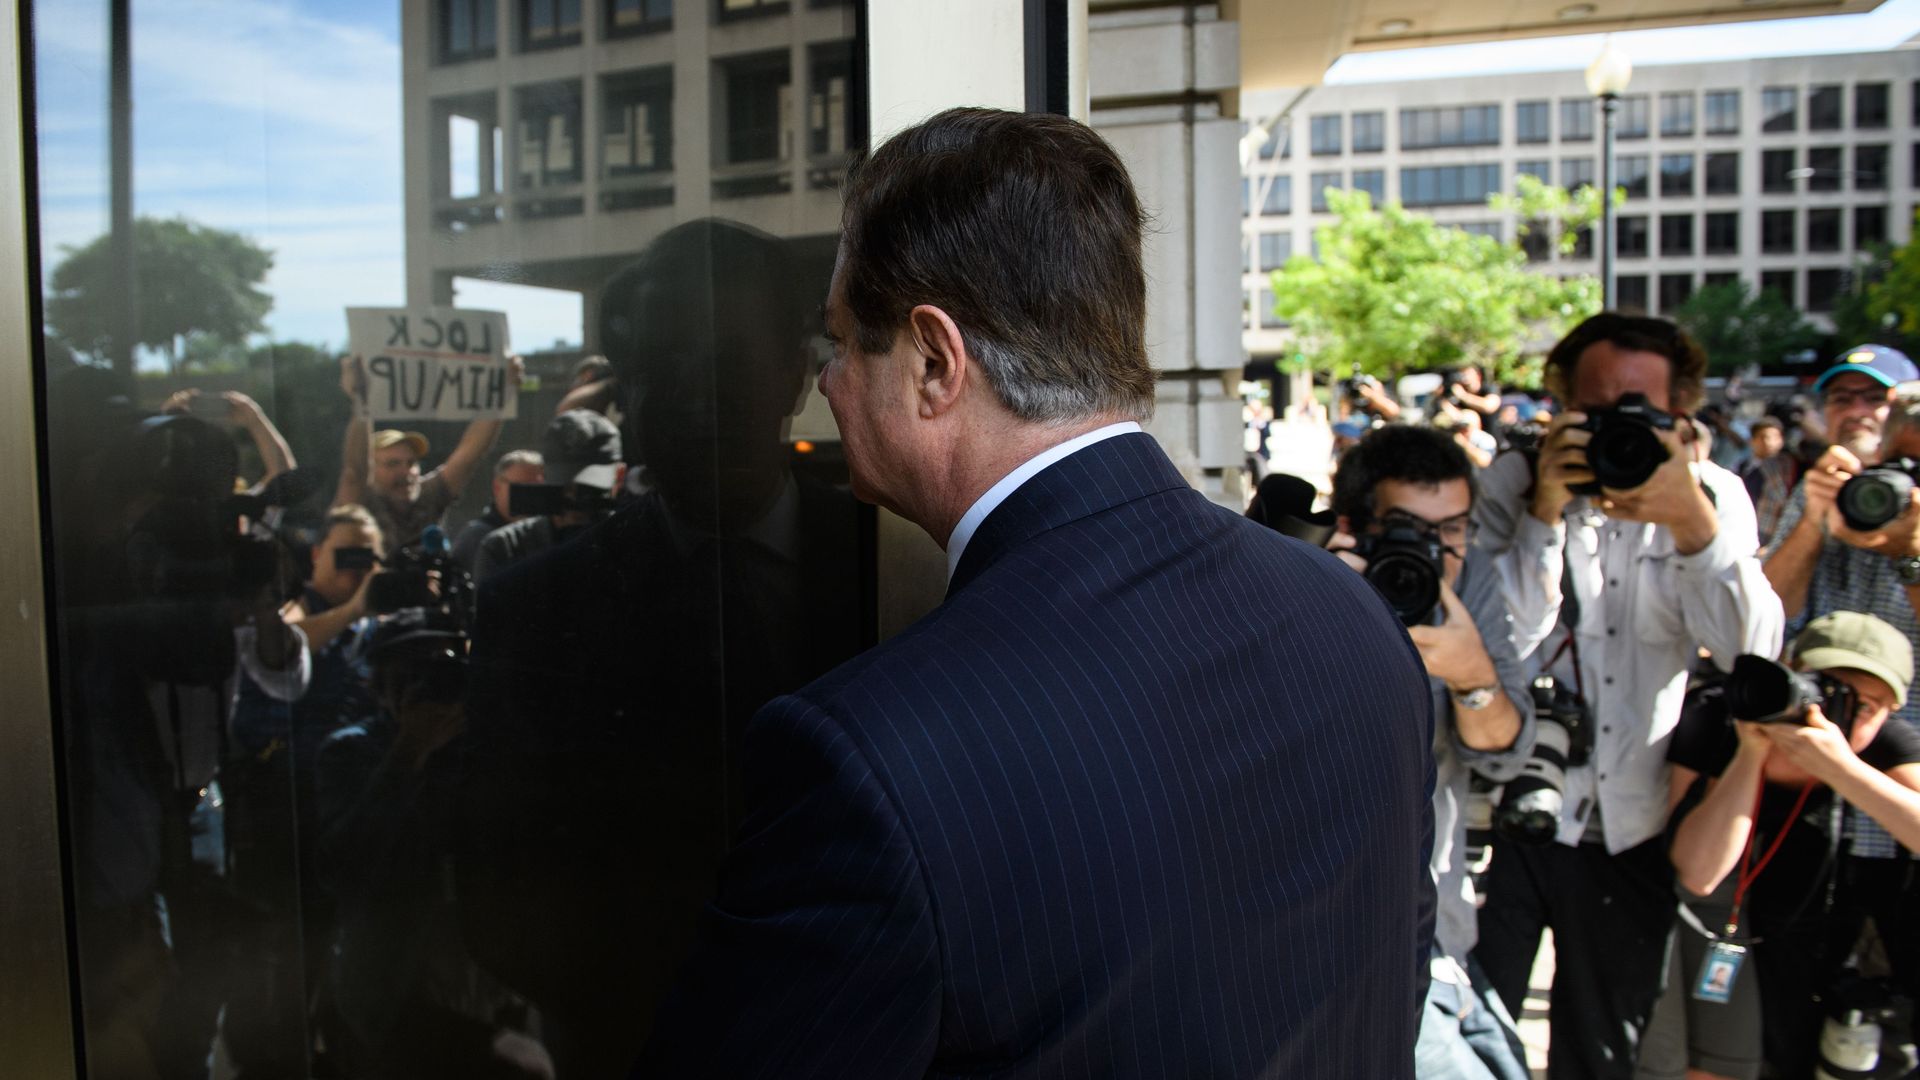 Paul Manafort walks into a building with his back toward the camera. In the revolving door reflection you can see cameras and protestors surrounding him.